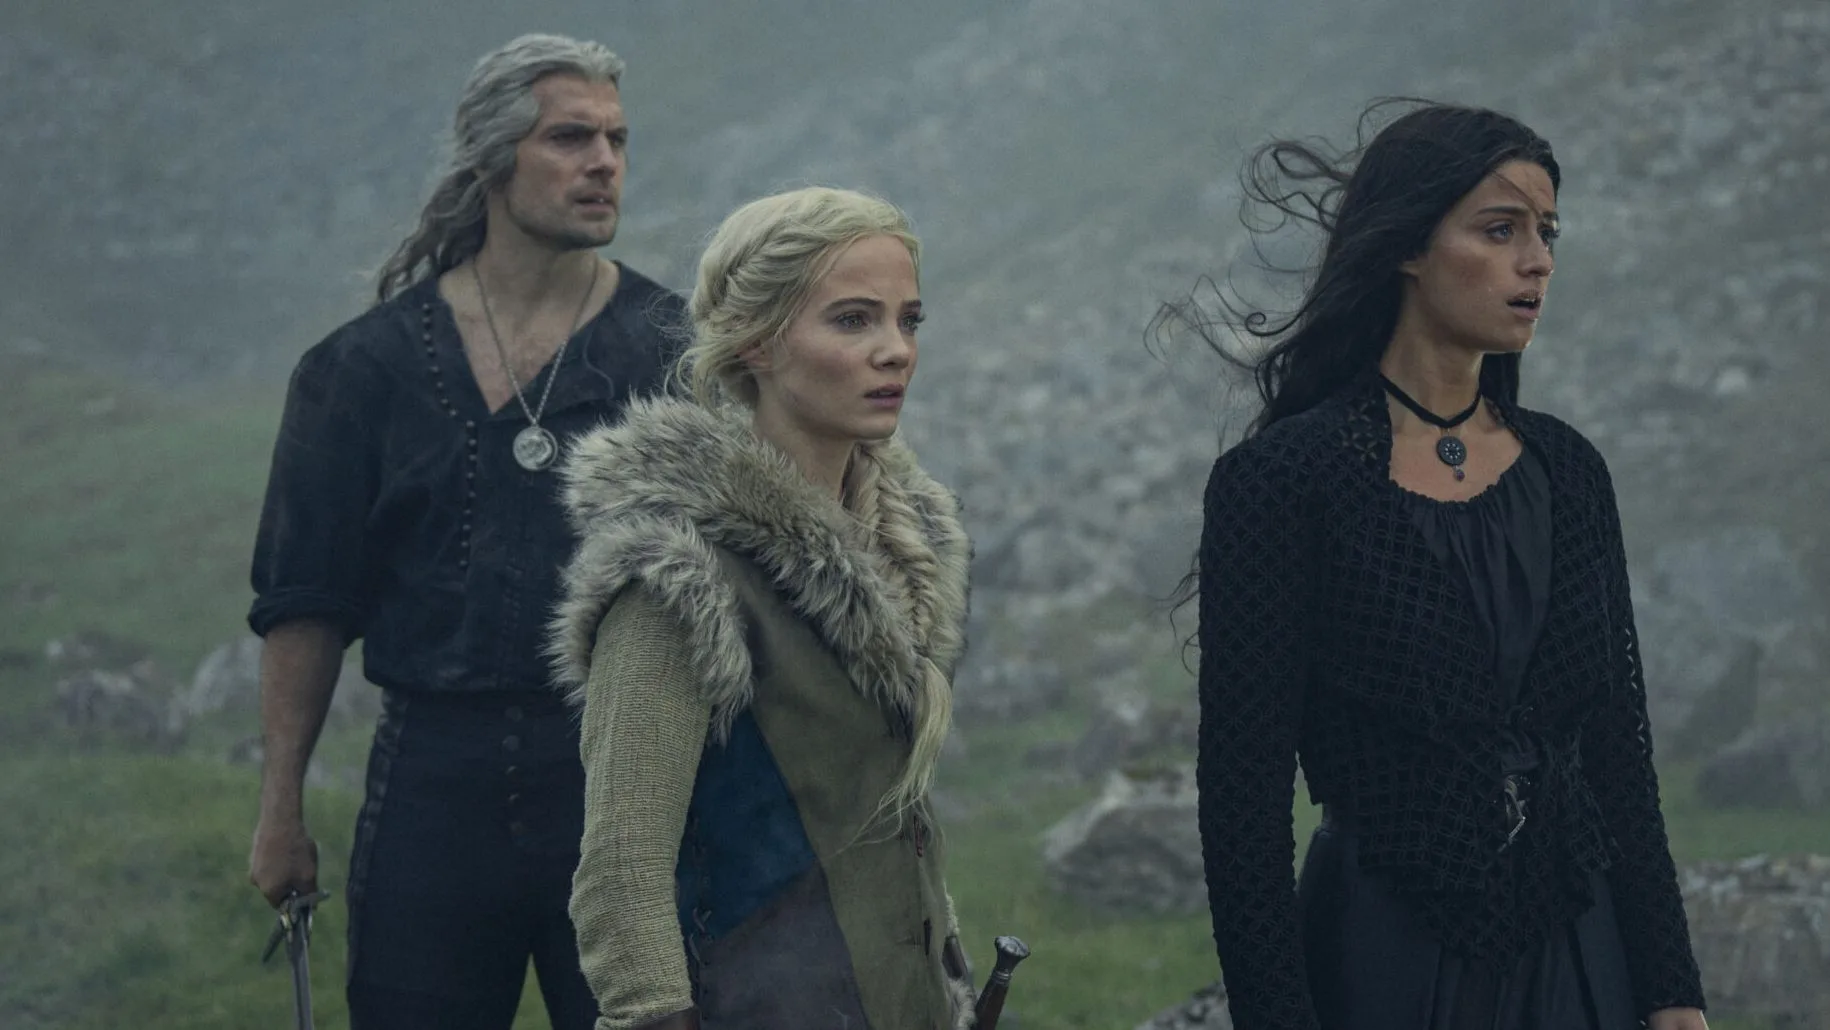 The Witcher Season 3 Clip Shows Geralt, Yennefer, & Ciri Becoming a Family